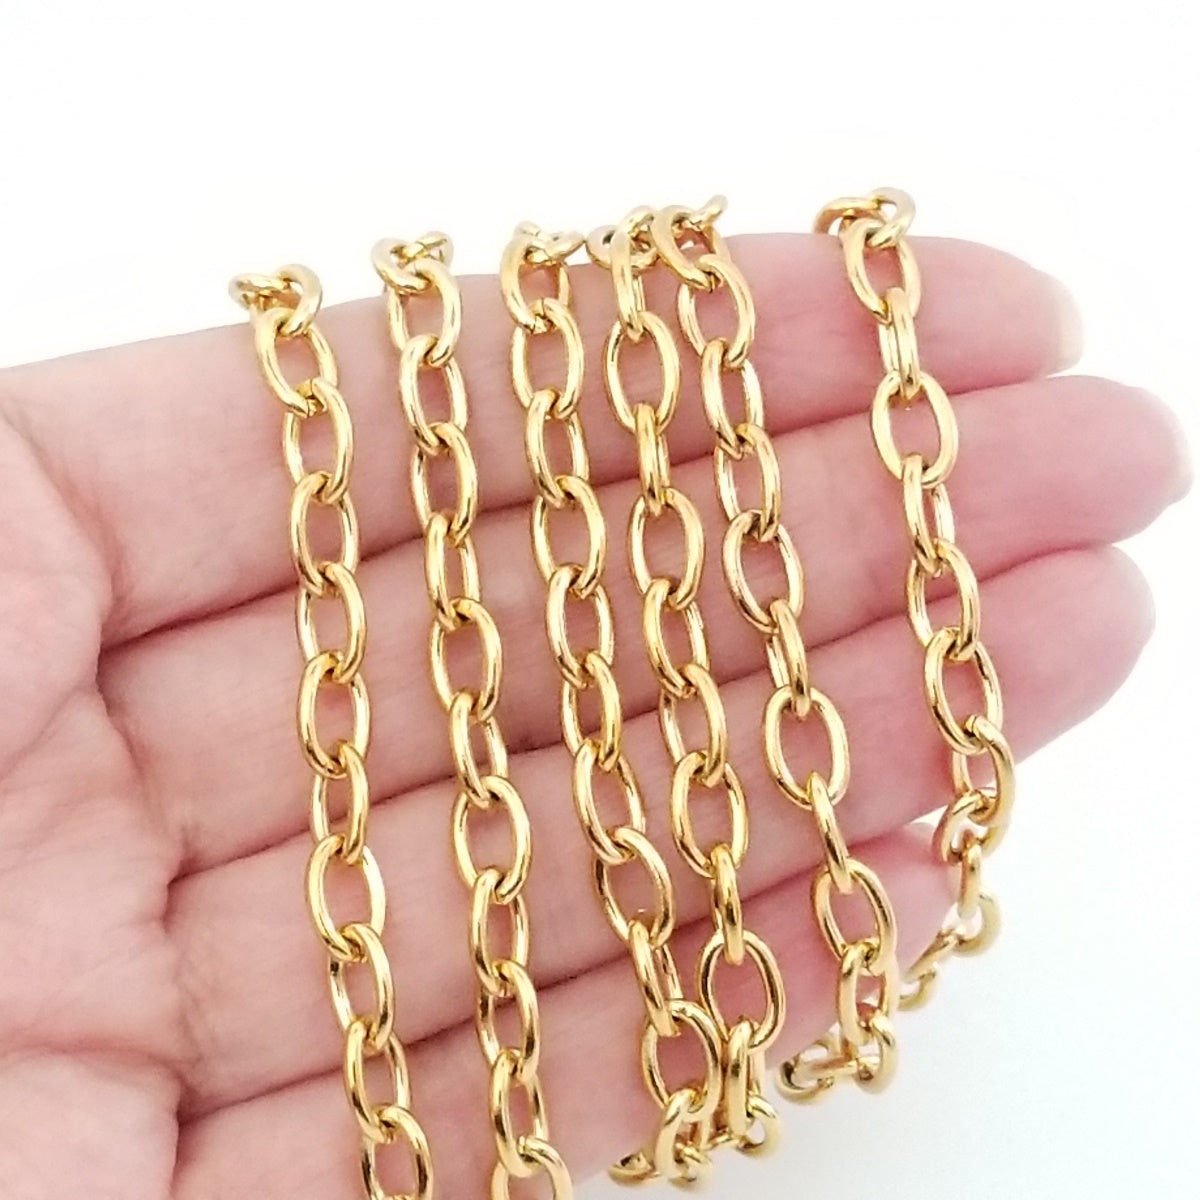 Gold Stainless Steel Jewelry Chain, 3x4mm Oval, Open Links, Lot